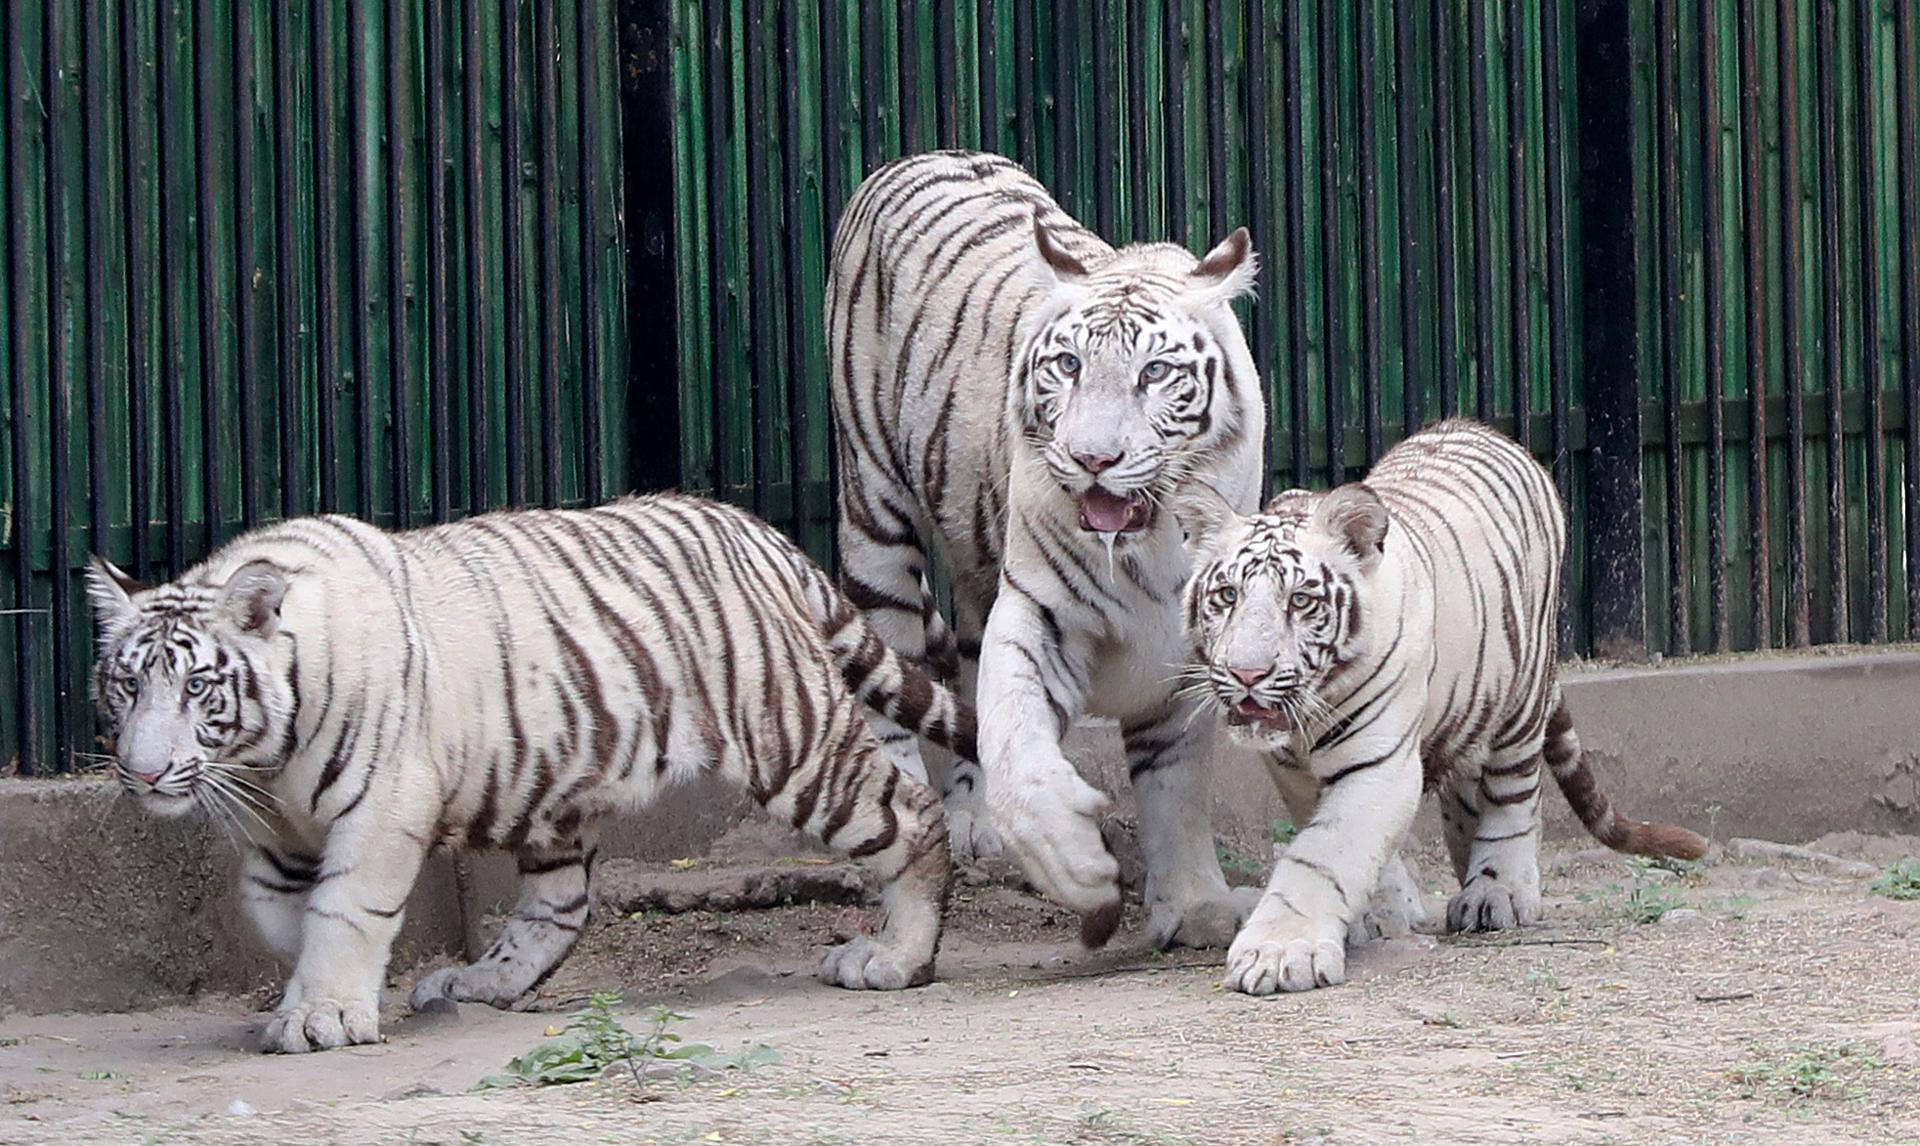 White tiger cubs 'Vyom' and 'Avni' along with their mother 'Sita' pictured inside an enclosure after they were released for public viewing at National Zoological Park in New Delhi, India, 20 April 2023. EFE-EPA/RAJAT GUPTA